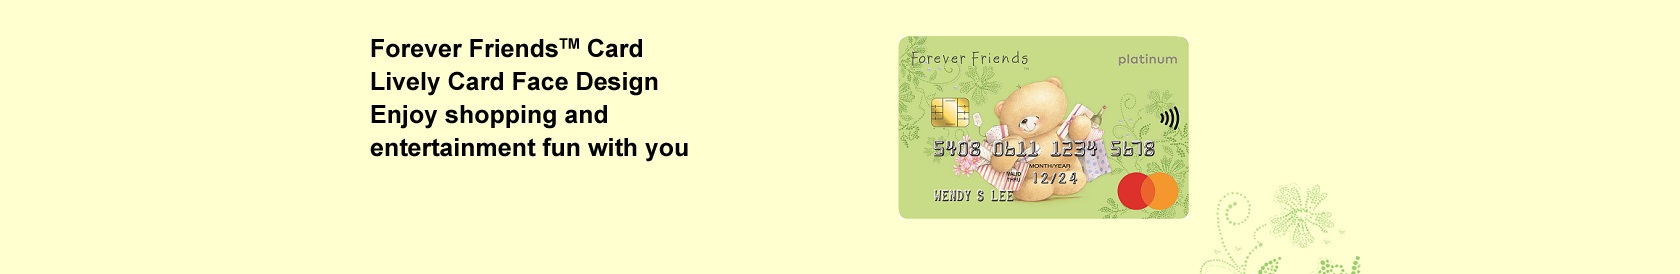 Hang Seng Card Products - Forever Friends Card